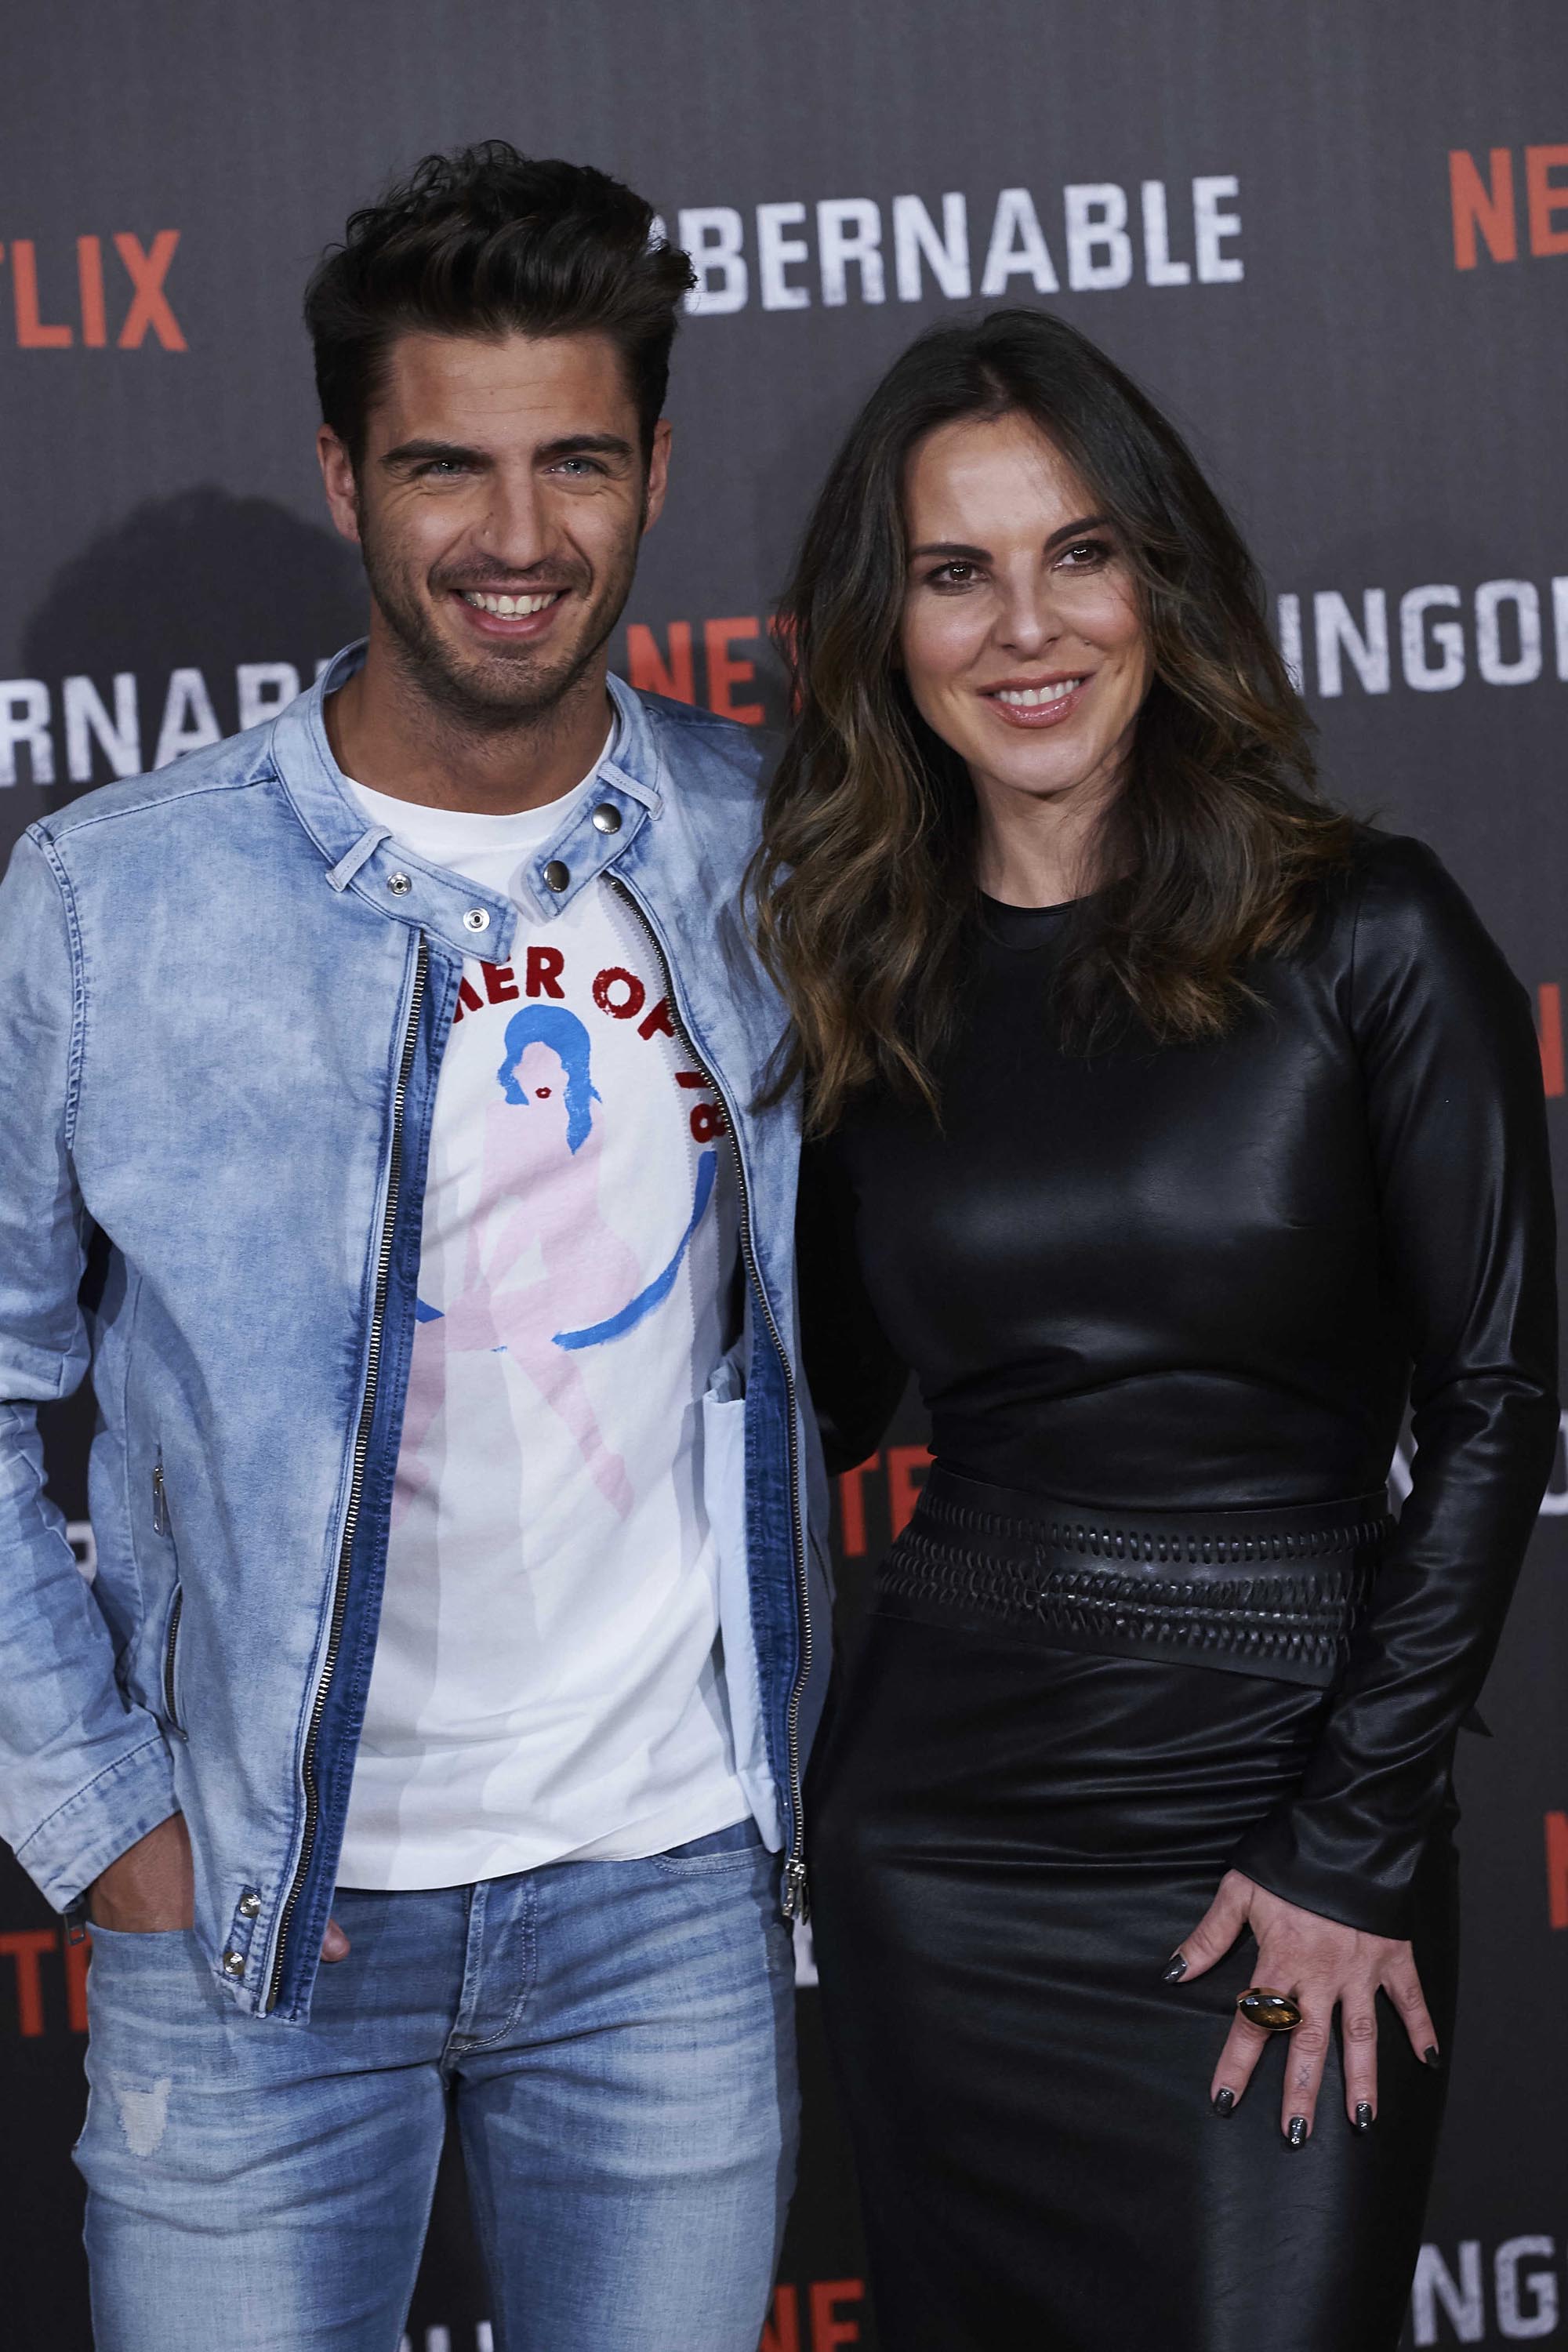 Kate del Castillo attends a photocall for Netflix’s ‘Ingobernable’